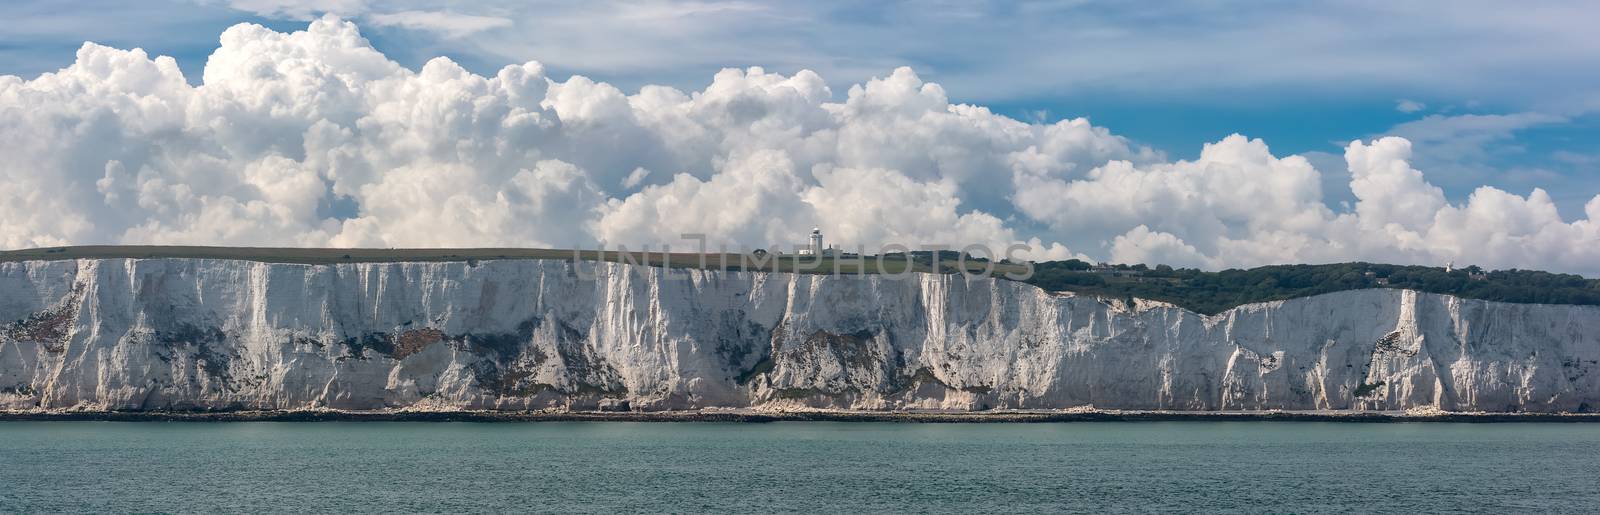 Amazing wide angle panoramic shot of the White Cliffs of Dover, a light house on top of the cliff. Beautiful fluffy clouds and blue sky in the background.